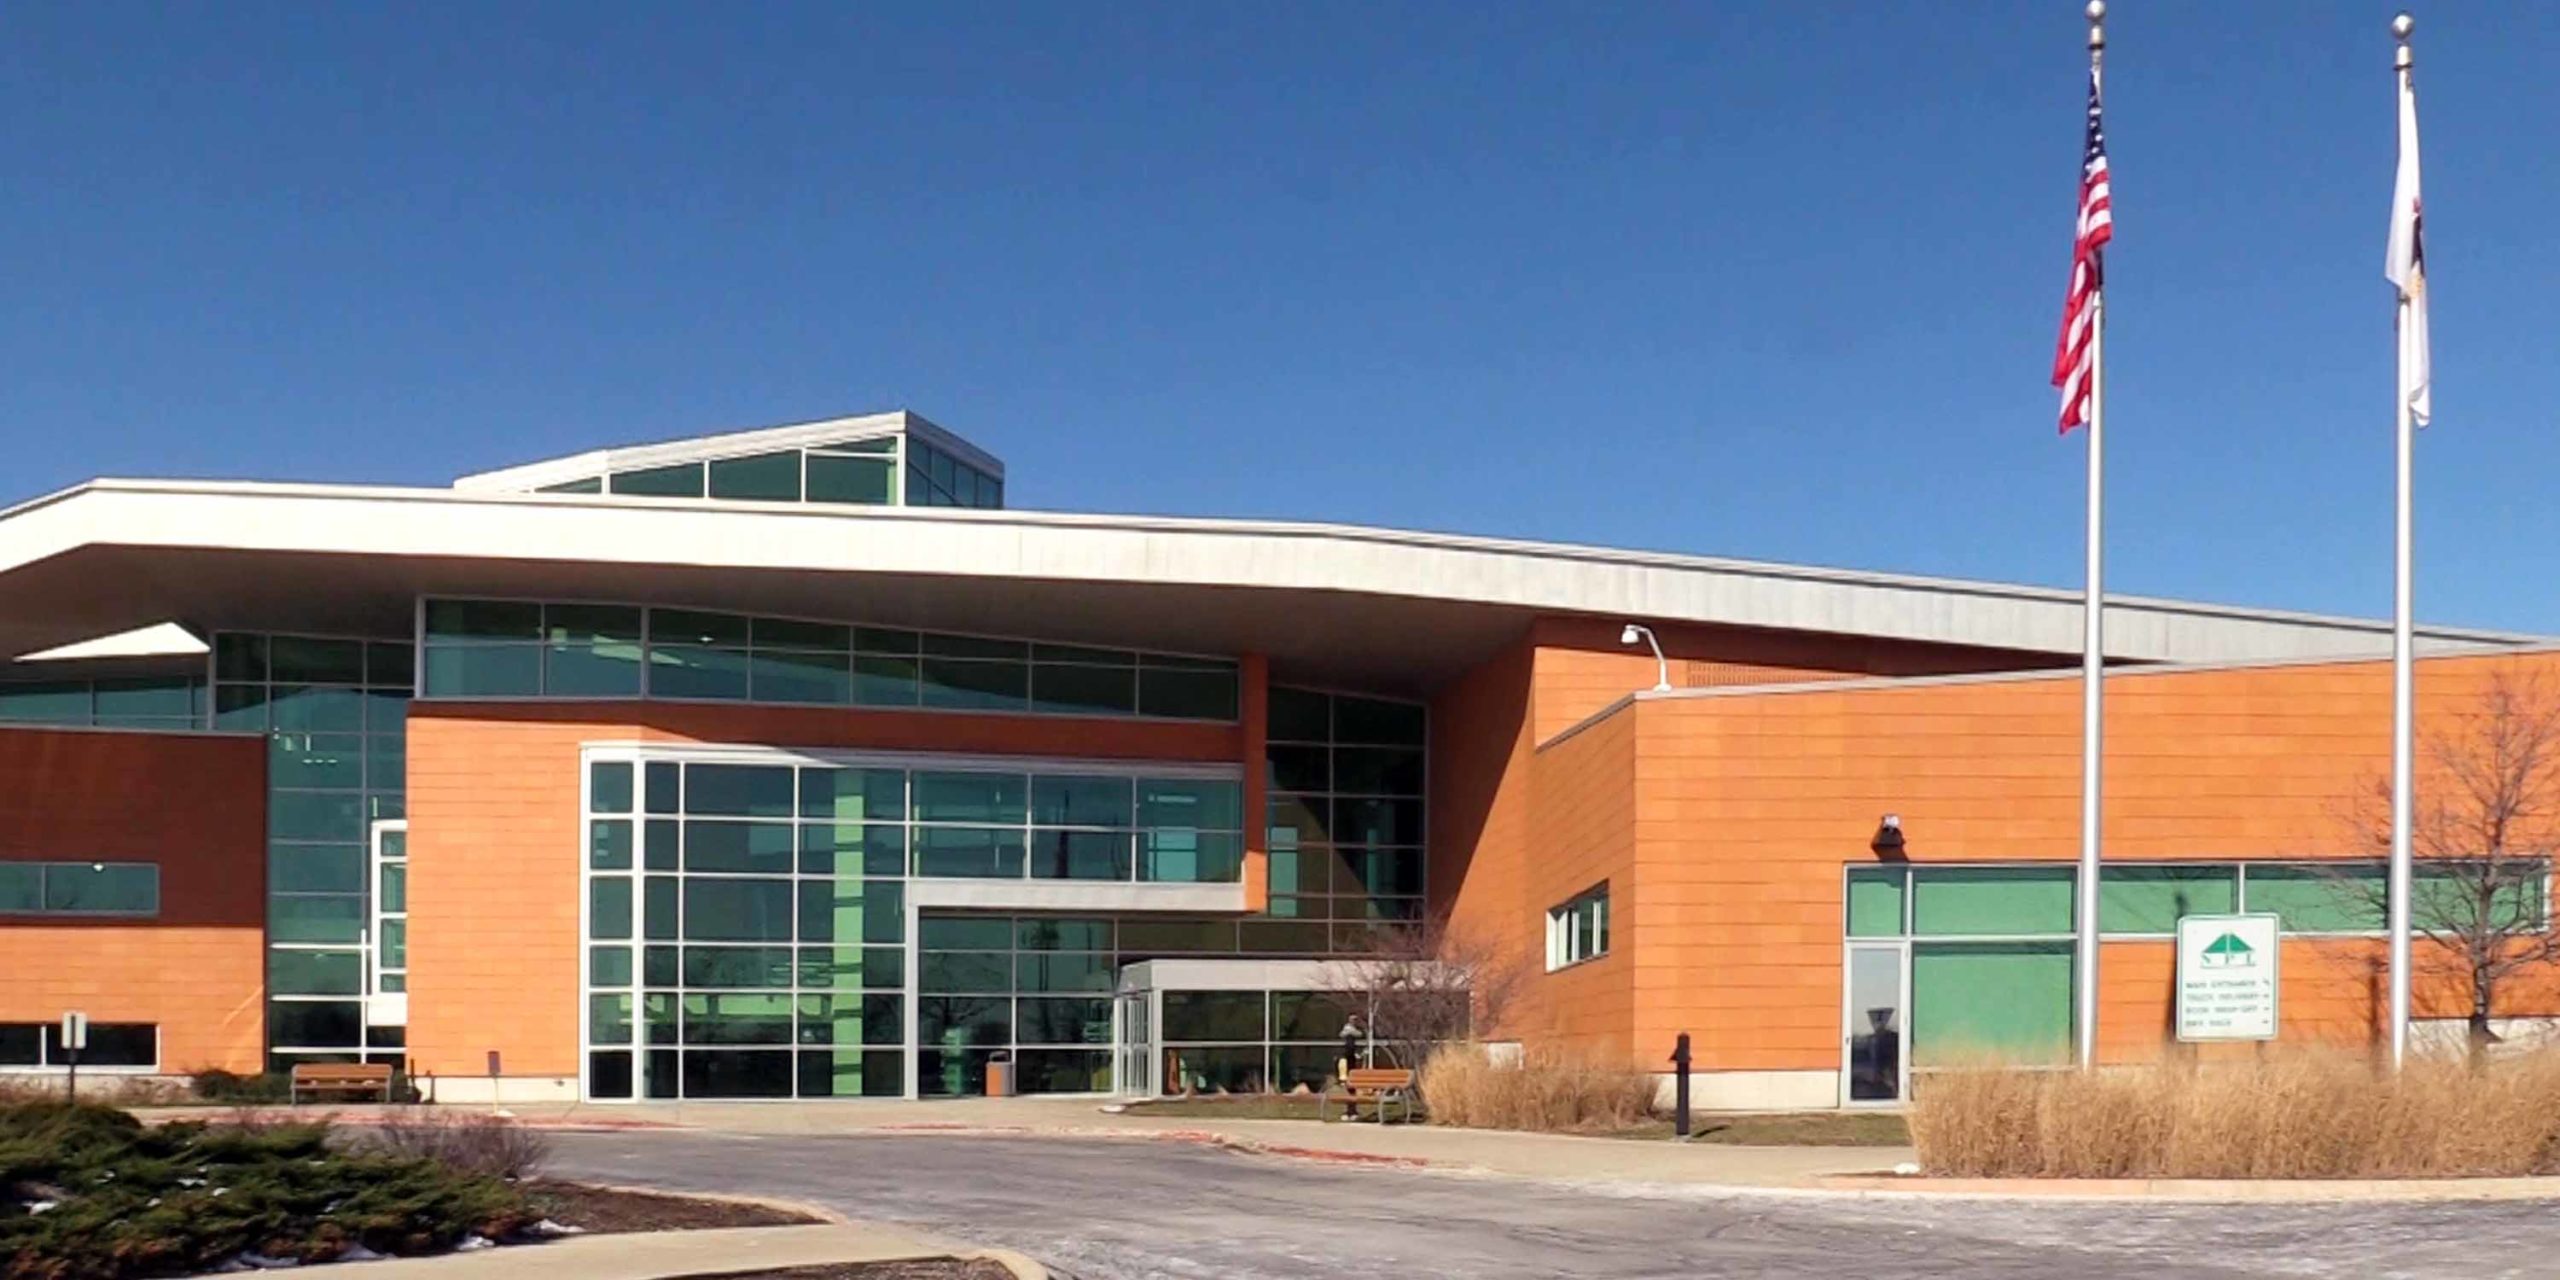 Naperville Public Library | 95th Street header image #1